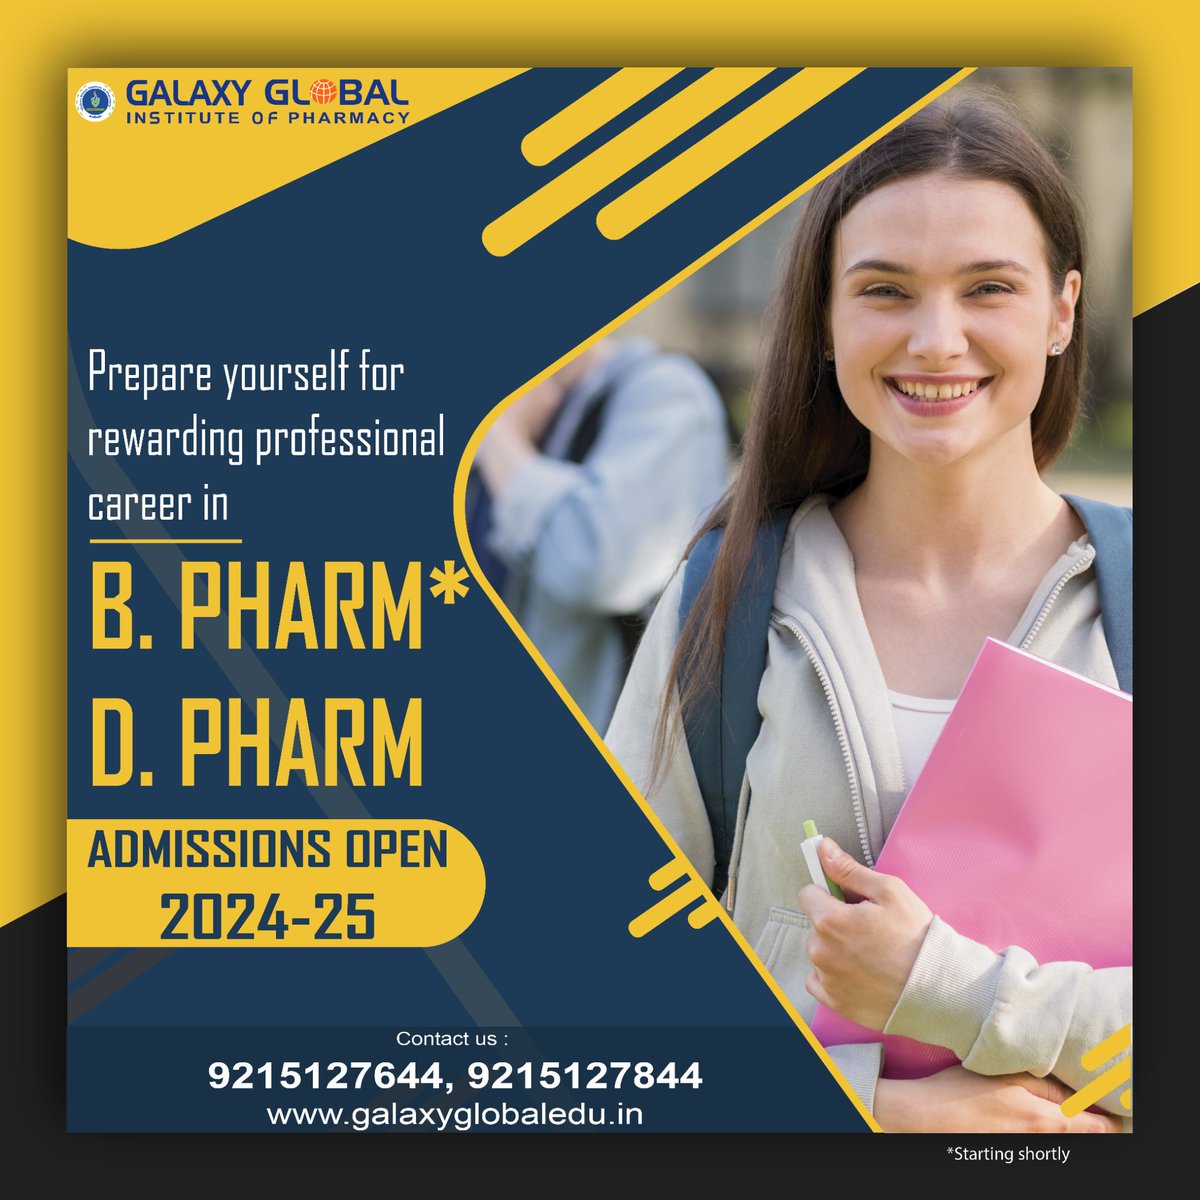 A pharmacy is essential in medicine because it involves preparing, dispensing, and properly using the medicine for therapeutic purposes. Admission opens for session 2024-25 @ Galaxy Global Group of Institutions, Ambala #gggi #admissionOpen2024 #dpharmacy #bpharmacy #pharmacy